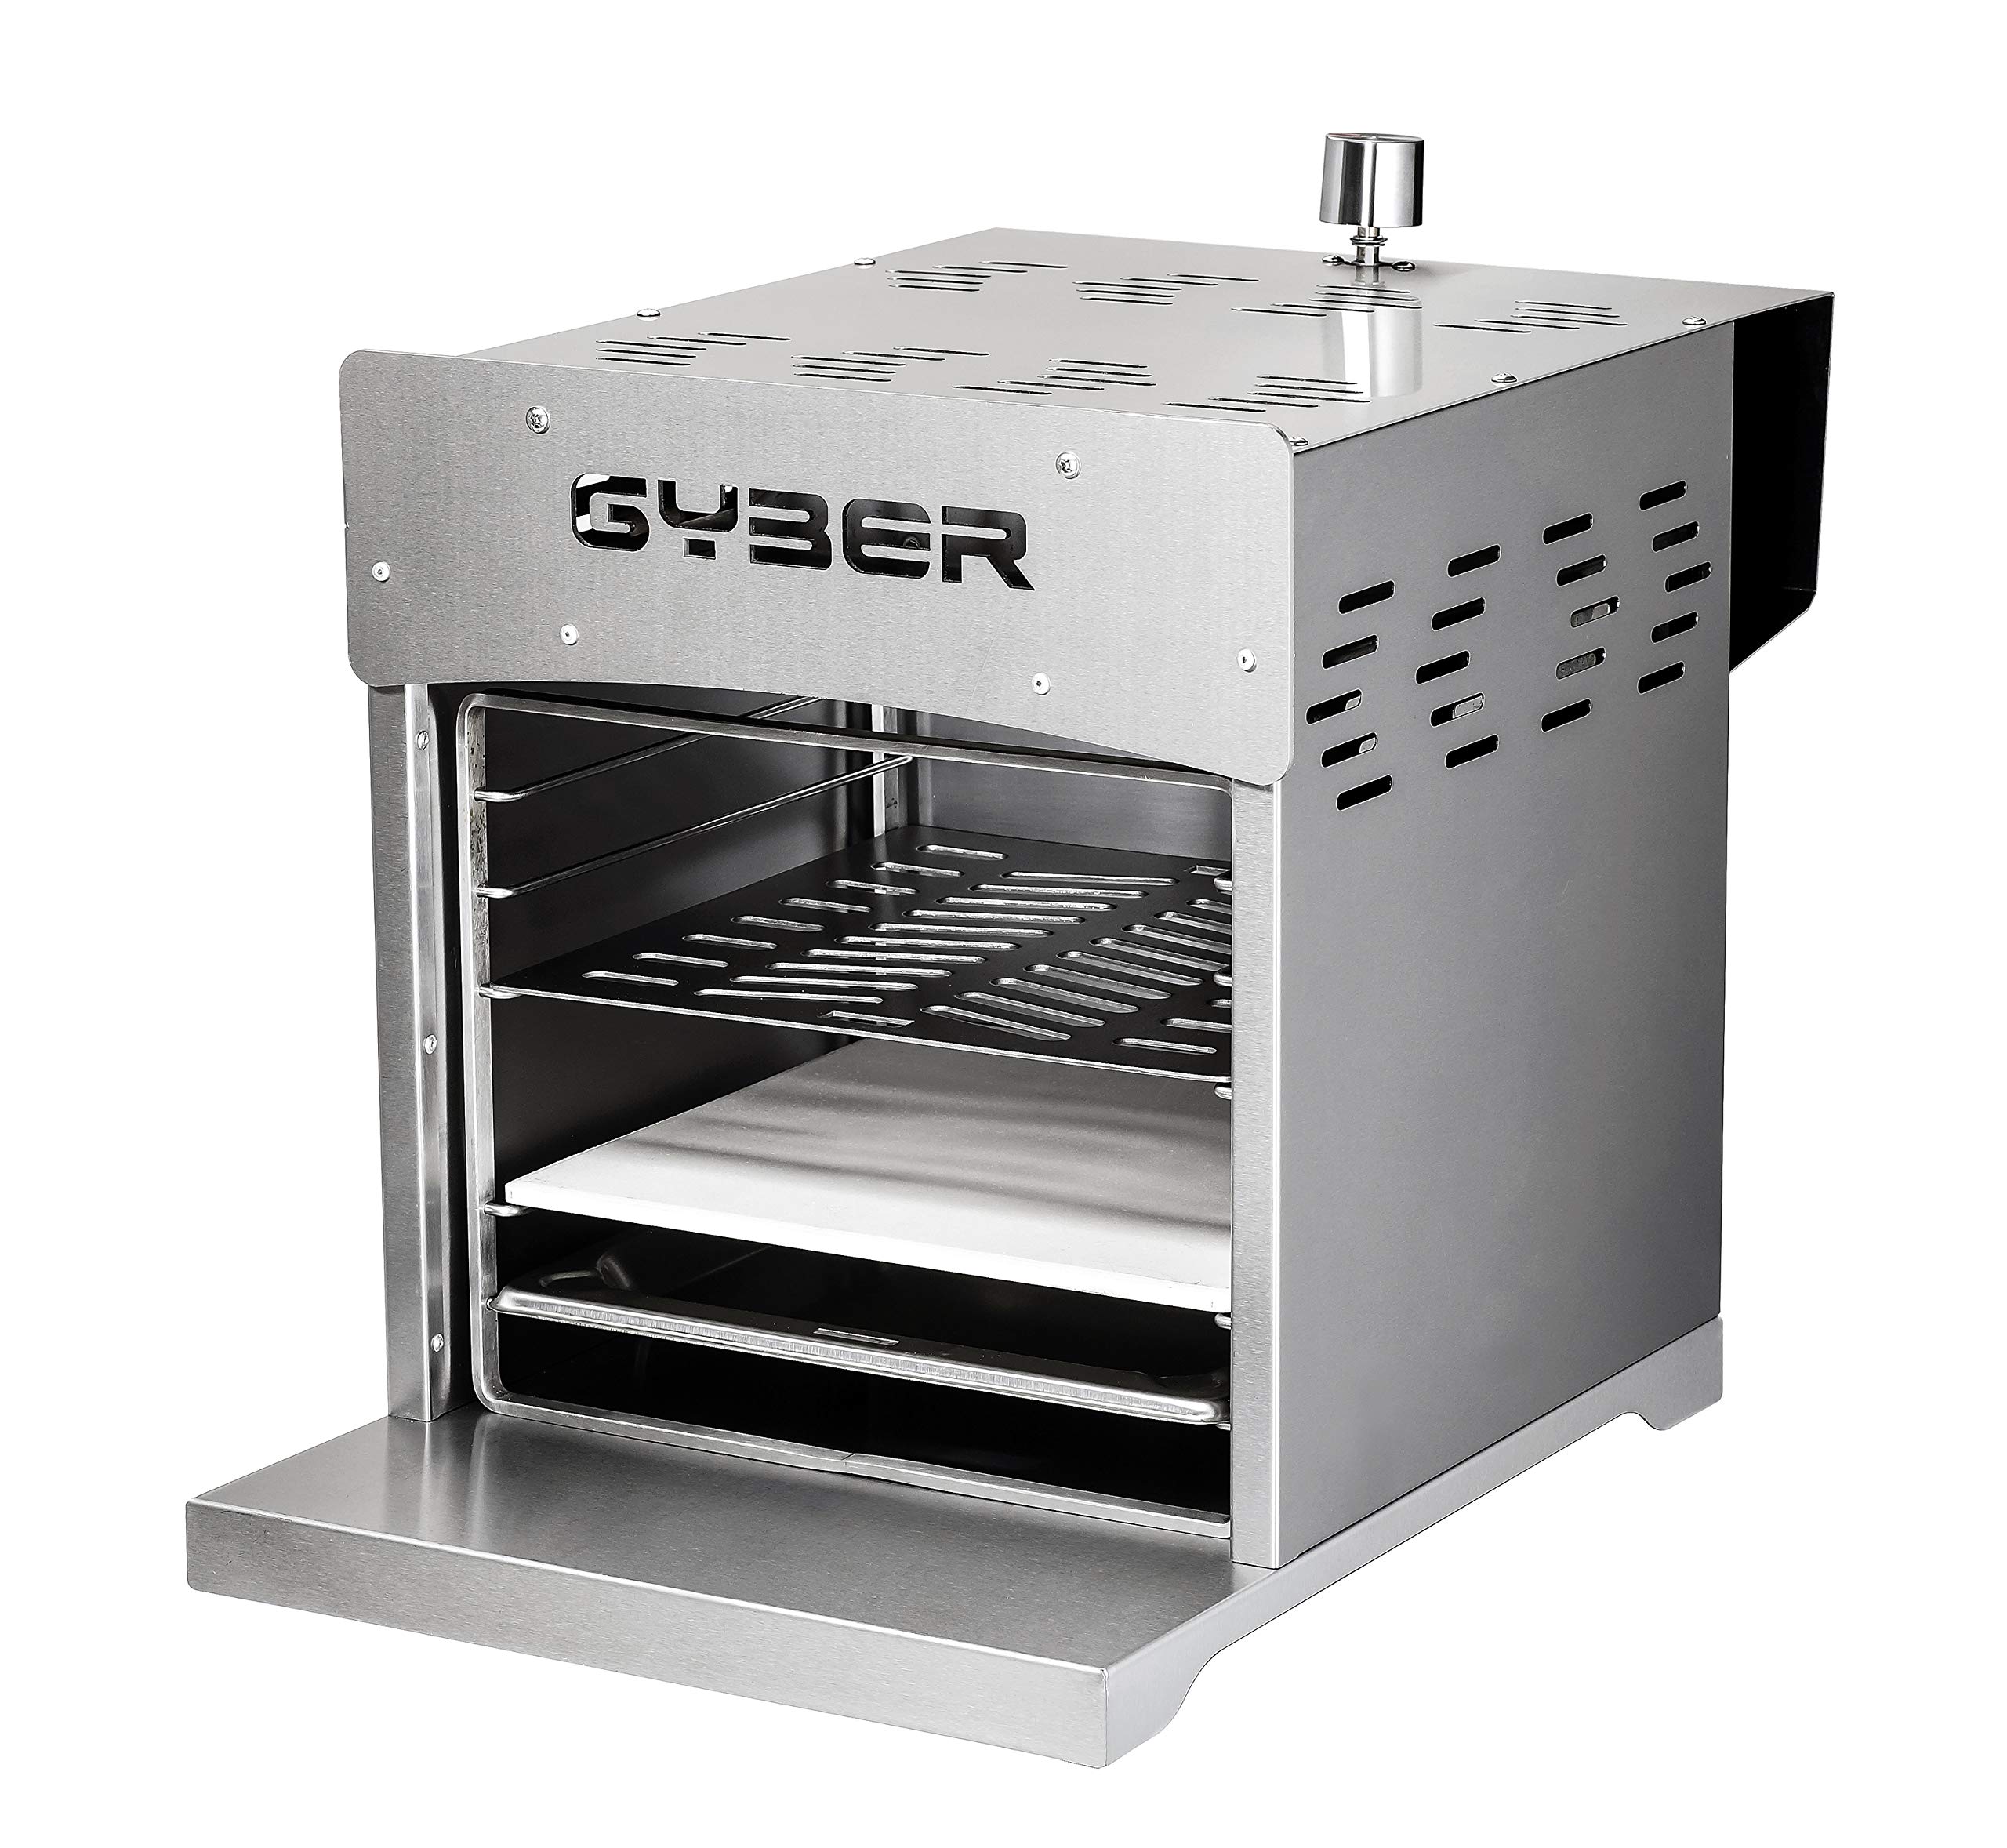 GYBER Dutton Infrared Char broil Grill